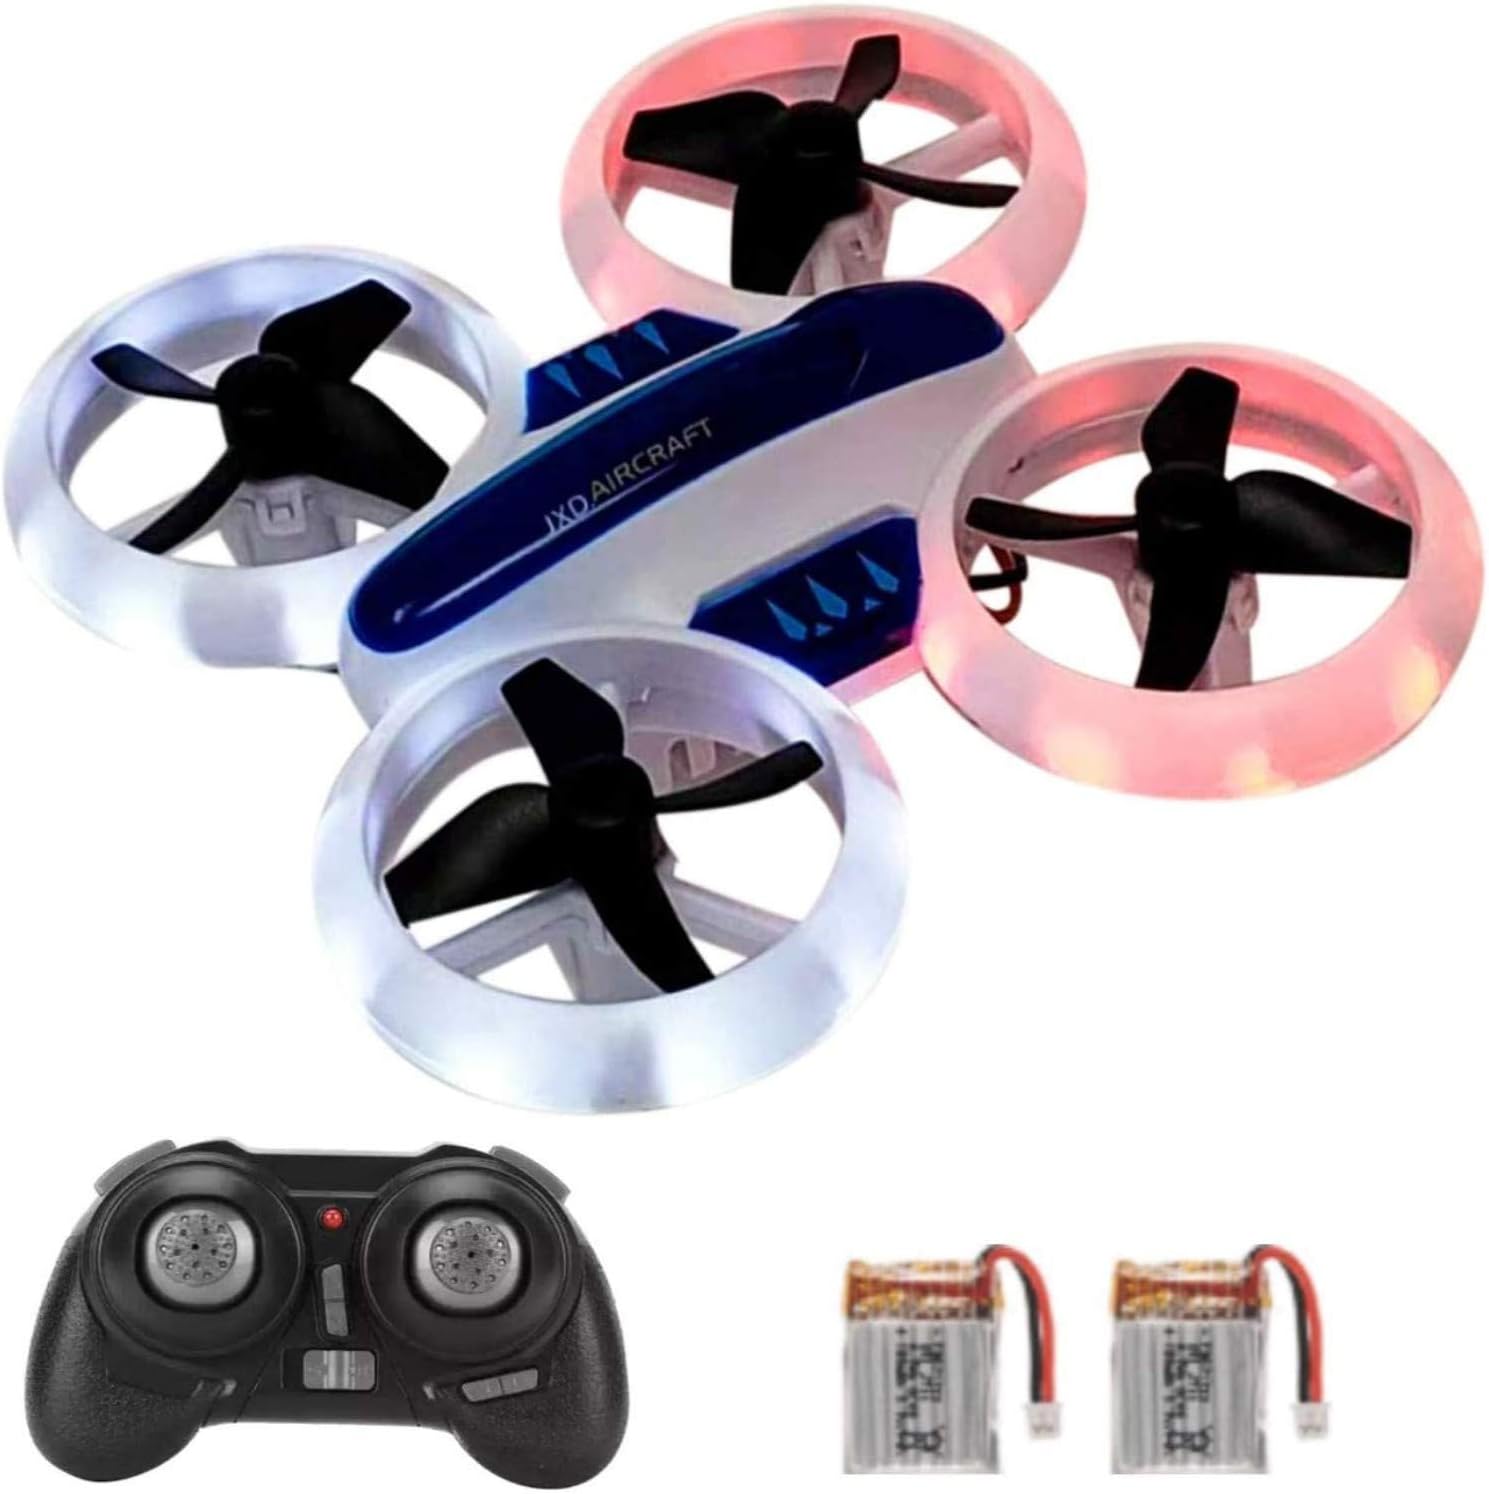 SkyCo New Desing UFO Mini Drone 532 2.4GHz RC Quadcopter Altitude Hold Neon Light Up Drones for Kids Boys Girls Toy with Extra Battery